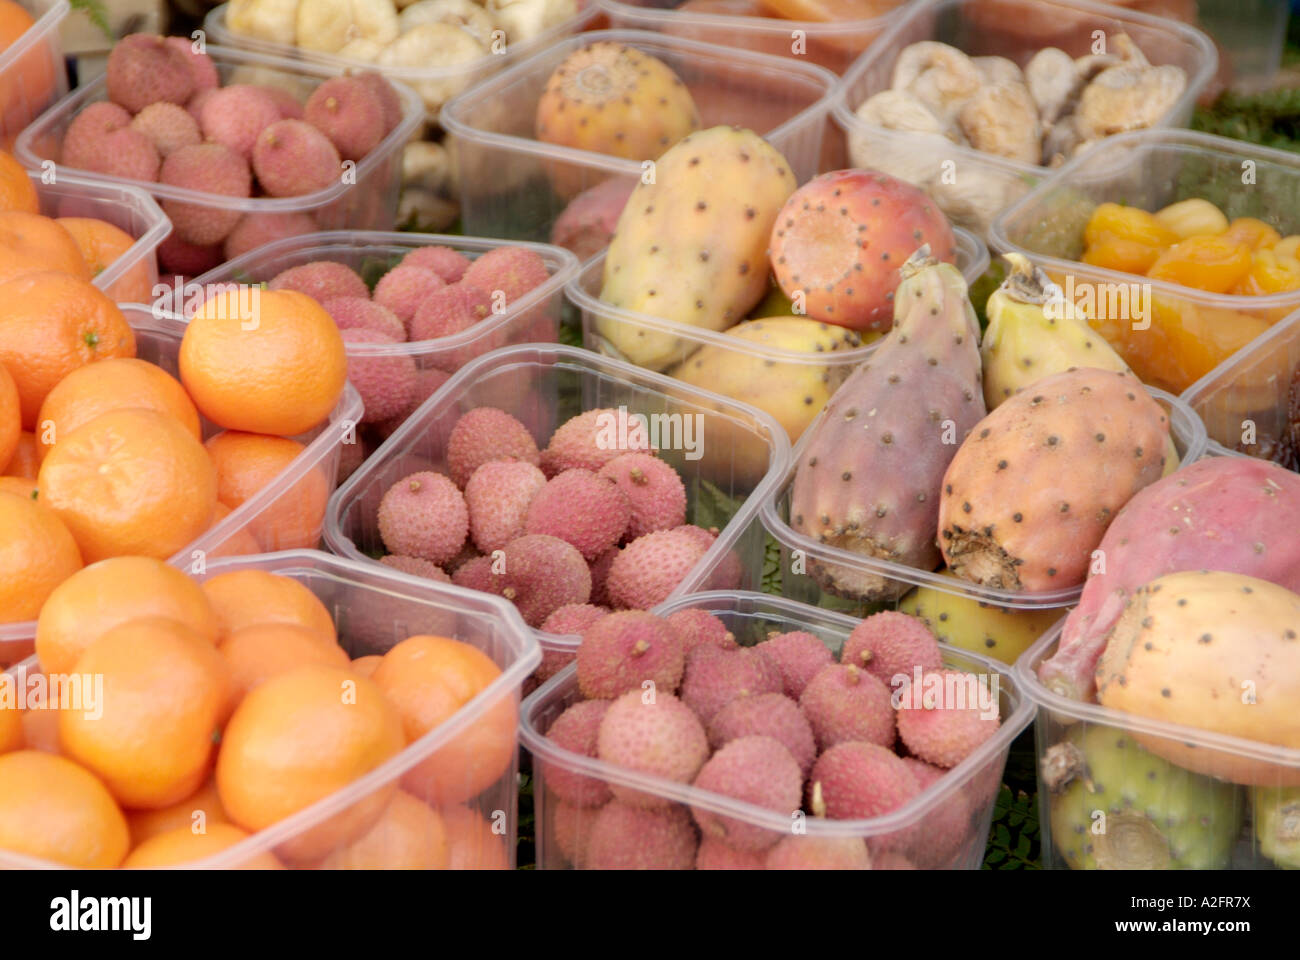 fresh, fruit, diet, roughage, digestion, fibre, exotic, produce, Stock Photo